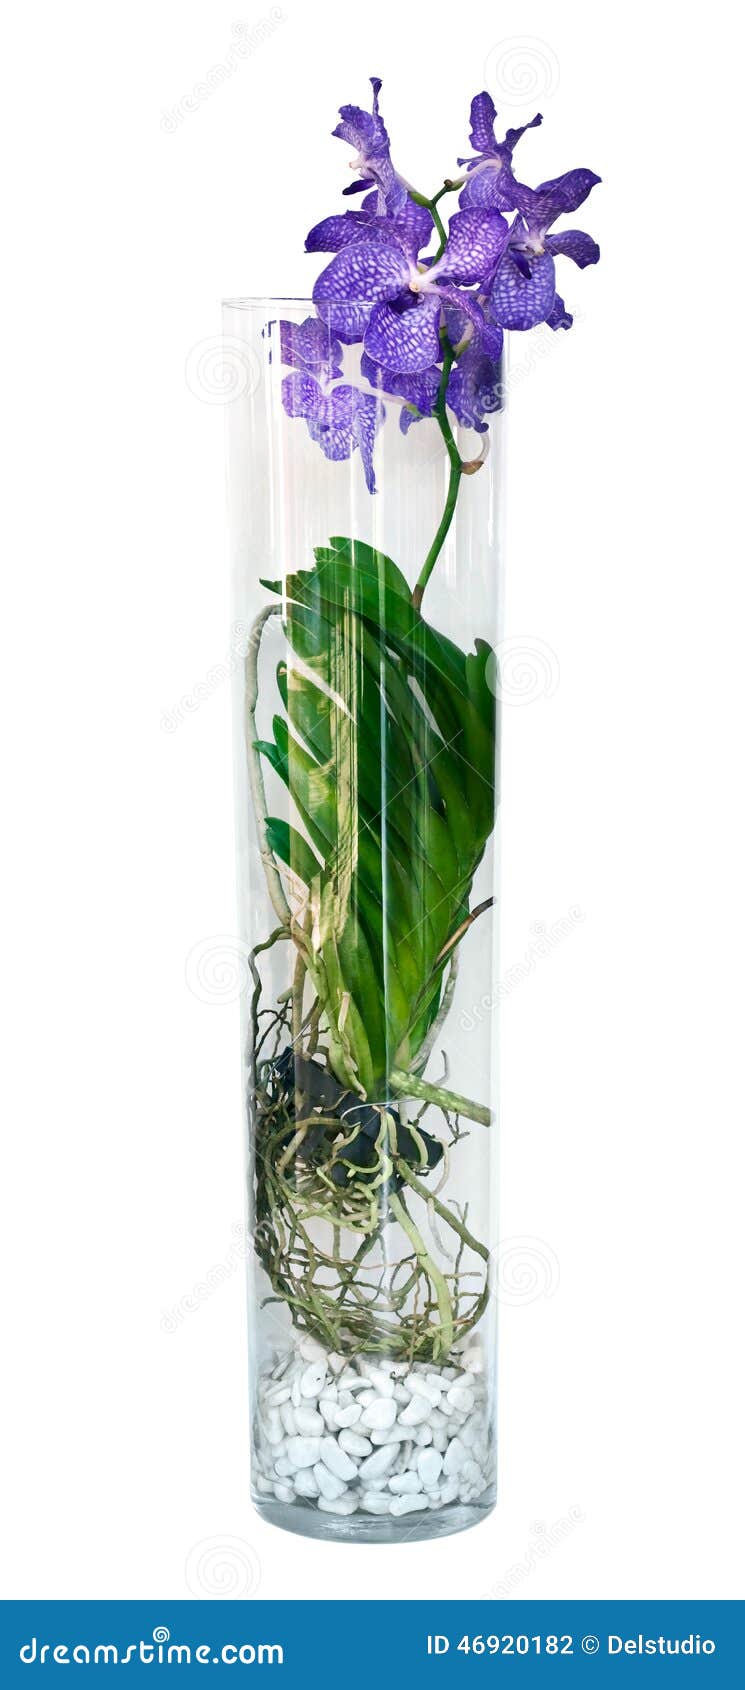 Purple Vanda Orchid Flower in a Glass Vase, Stock Photo - Image of roots,  wanda: 46920182